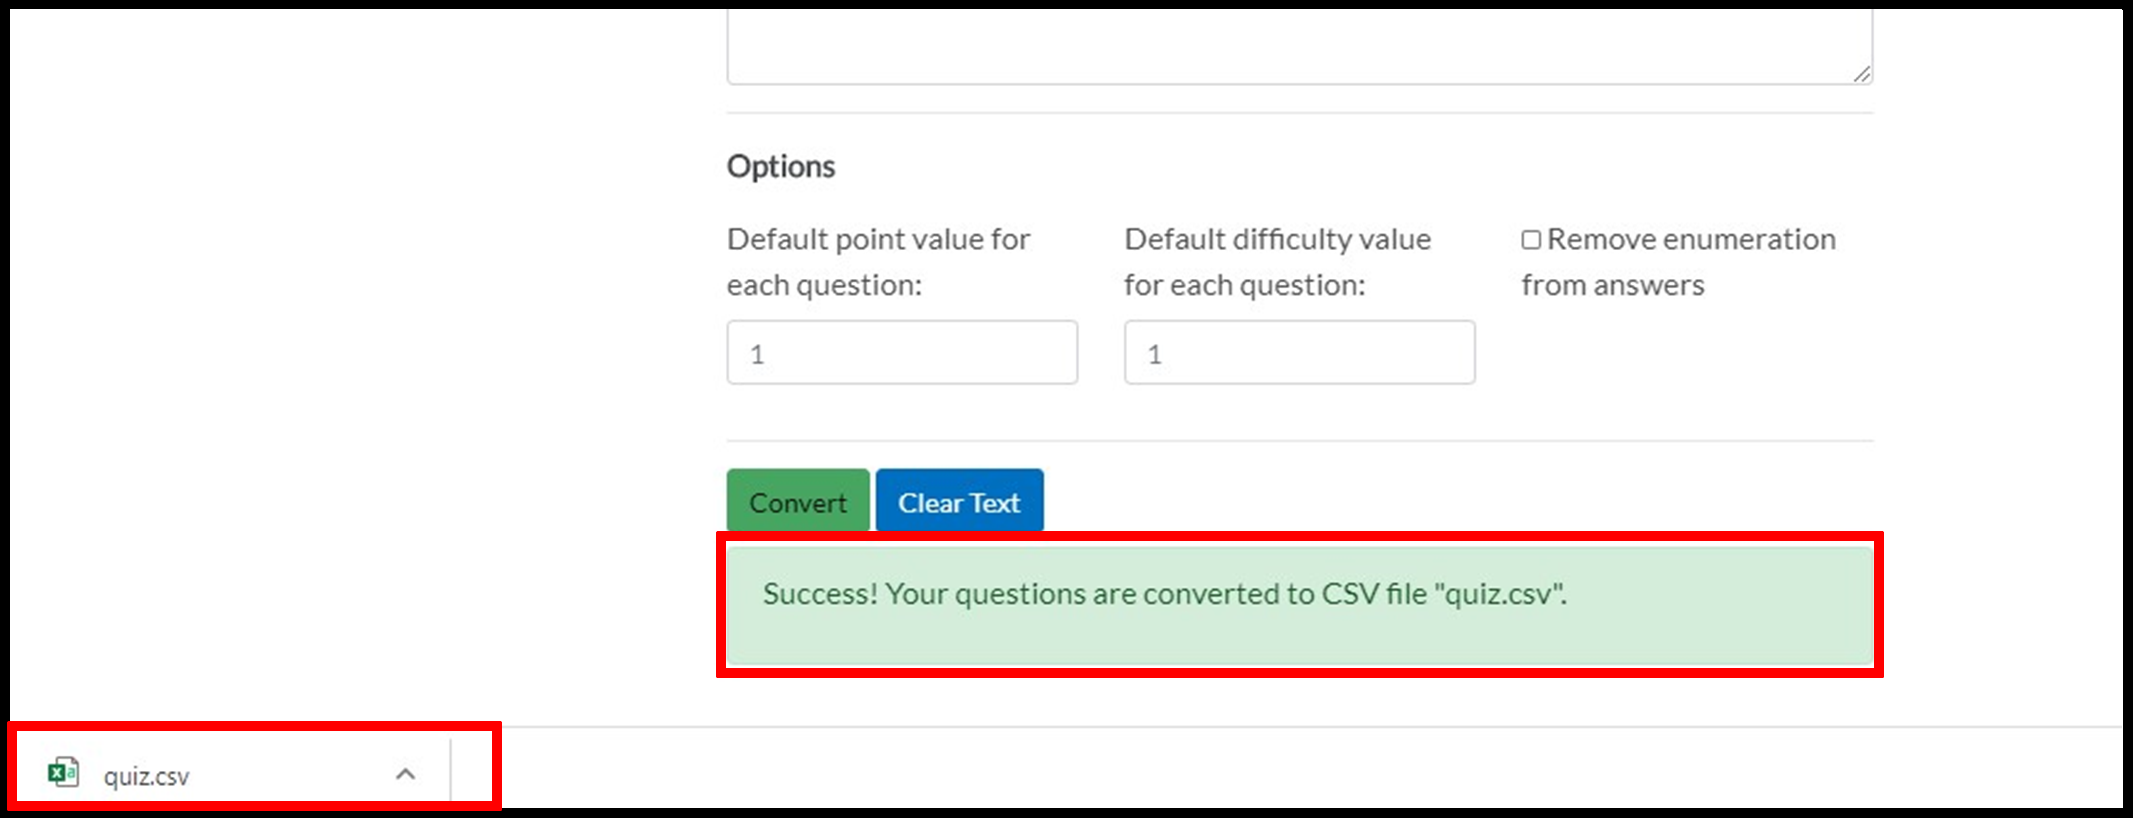 If the conversion to a CSV file is successful, the following message will display "Success! Your questions are converted to CSV file "quiz.csv" and the file will download to your browser.